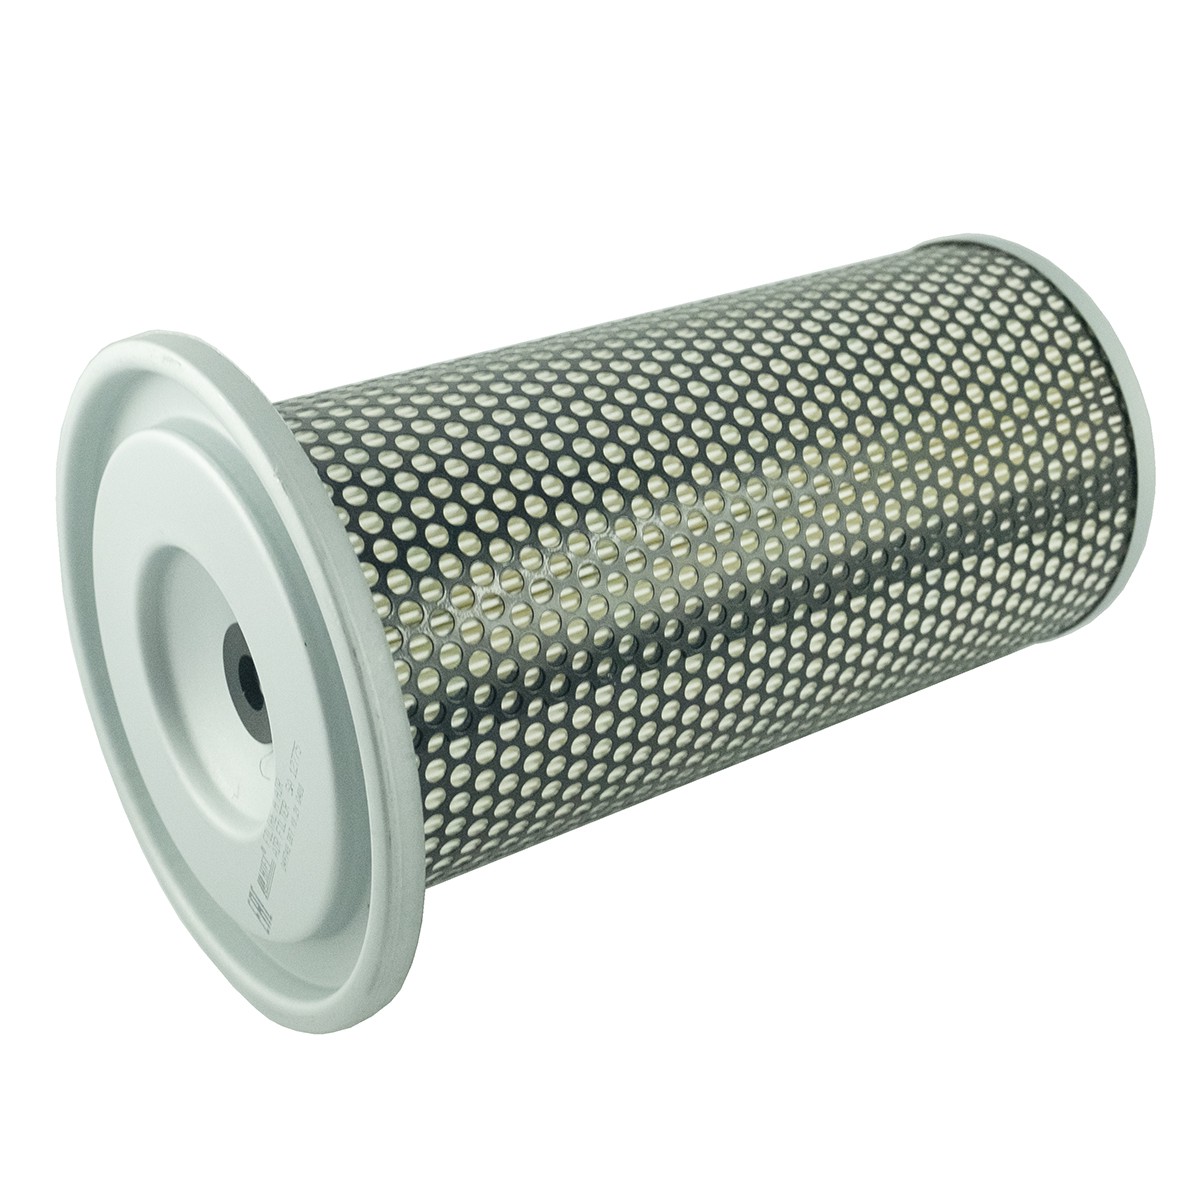 Air filter with plate / 131 x 292 mm / Case / SA 12775